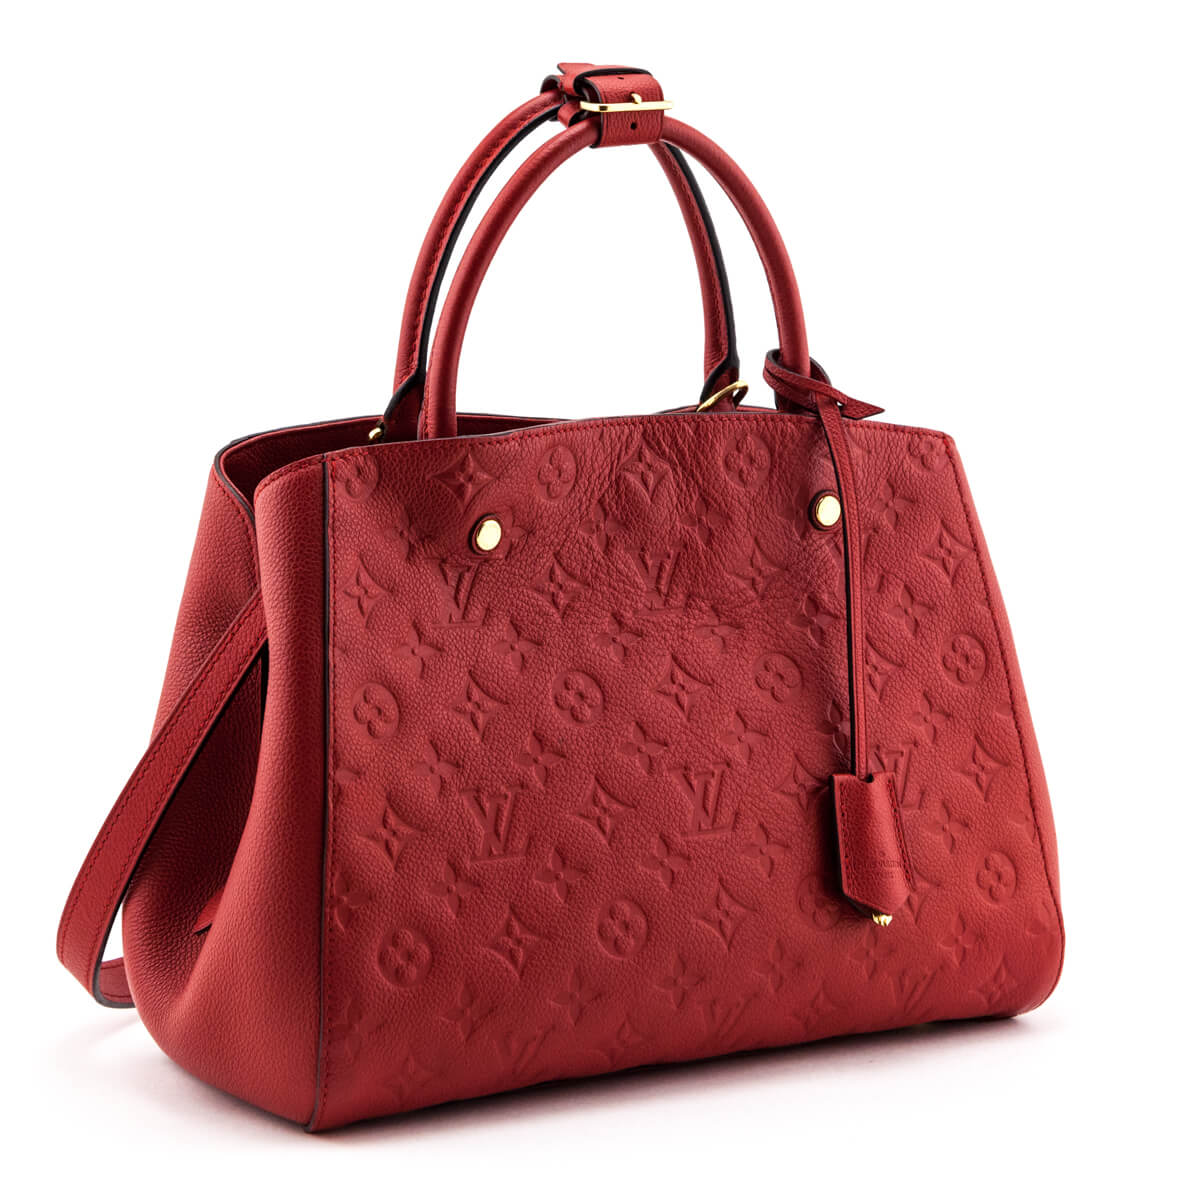 Louis Vuitton Montaigne Red Bags & Handbags for Women for sale